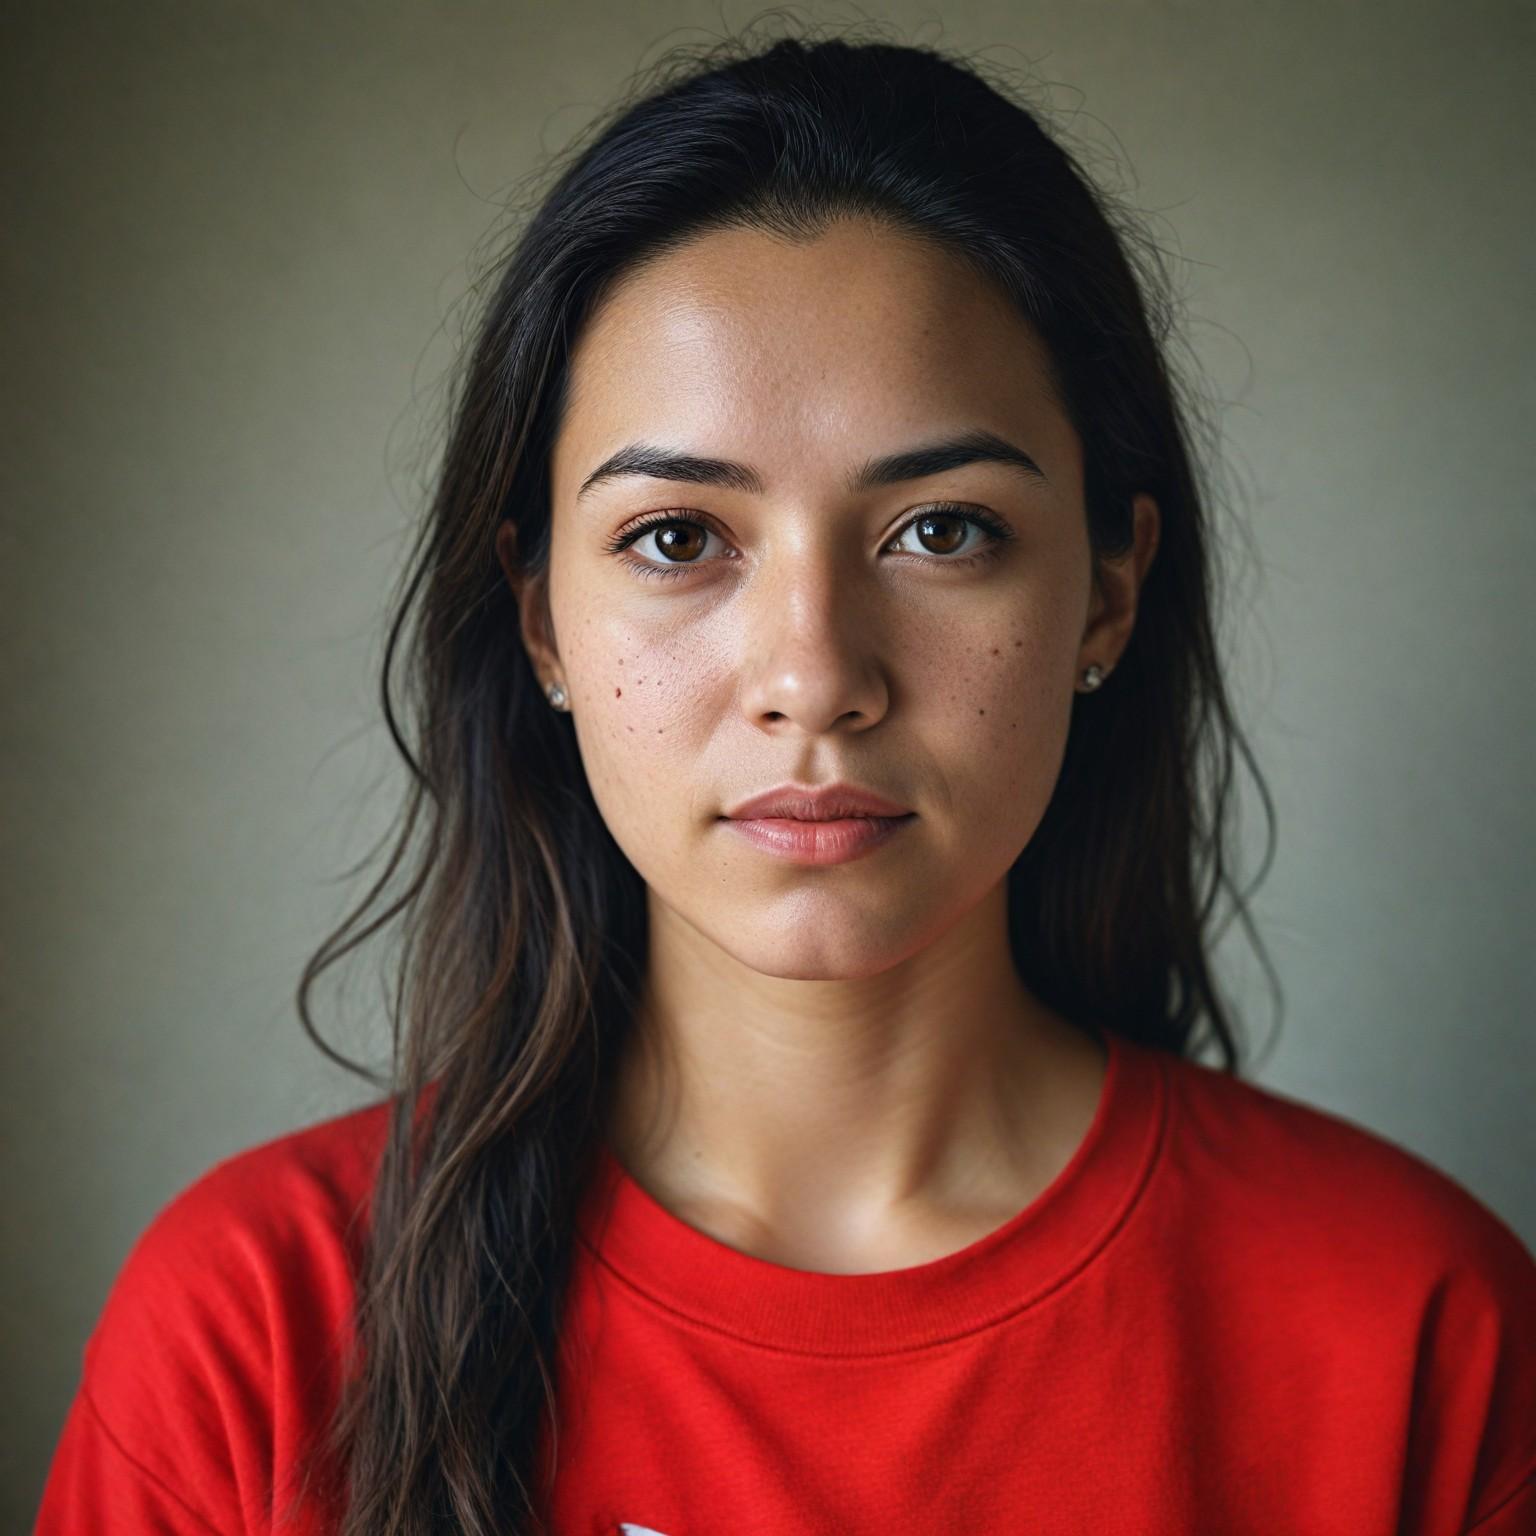 Close-up portrait of a young woman with a calm and direct gaze. She has olive skin, long dark hair pulled to one side, and light freckles across her cheeks and nose. She is wearing a red t-shirt. The background is a soft, neutral tone that highlights her facial features